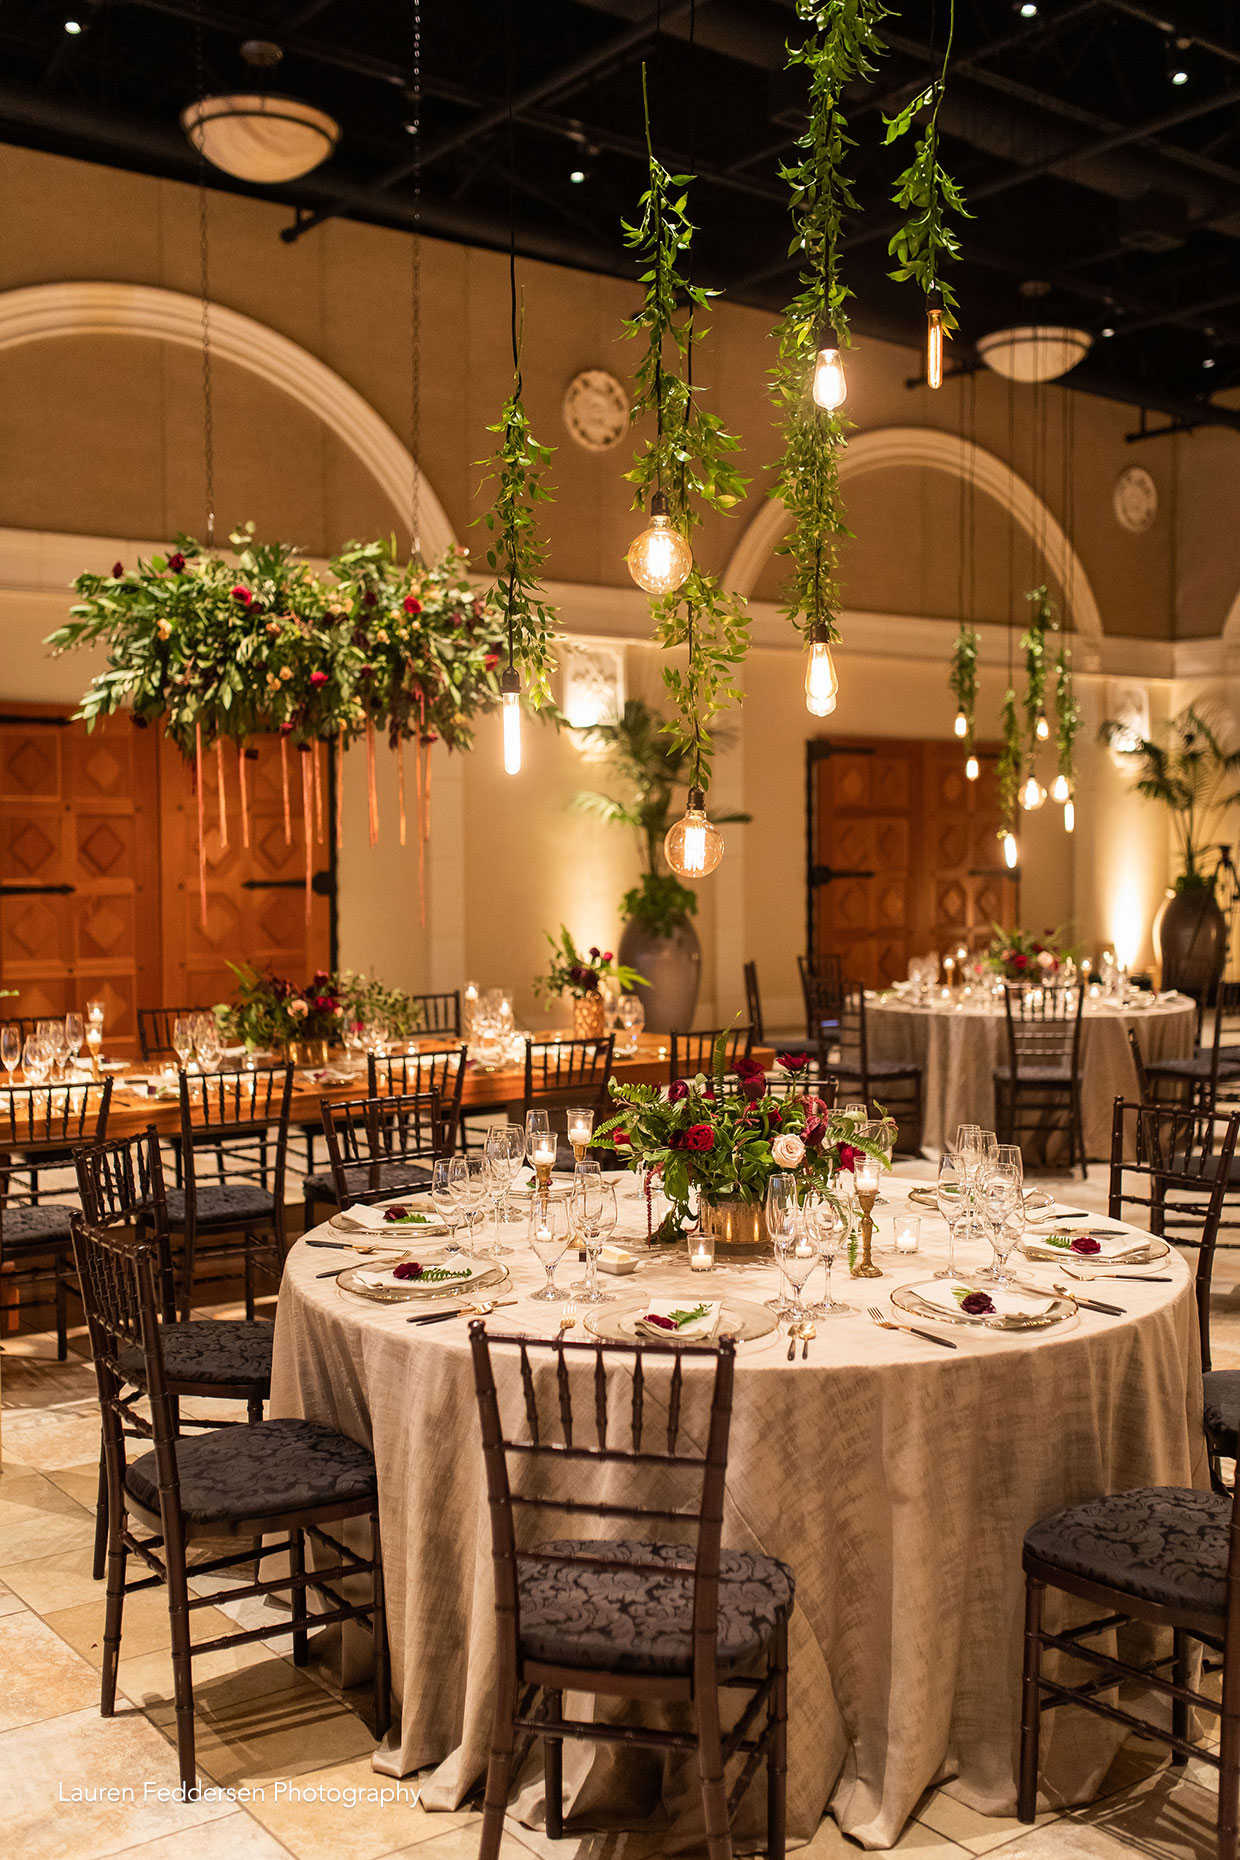 Unique boho wedding reception with hanging greenery and Edison light bulbs at Casa Real at Ruby Hill Winery (www.casarealevents.com).  Photo by: Lauren Feddersen Photography; Florals (and floral chandelier): Nicole Ha Design; Lighting: Fantasy Sound Event Services; Linen: Pleasanton Rentals